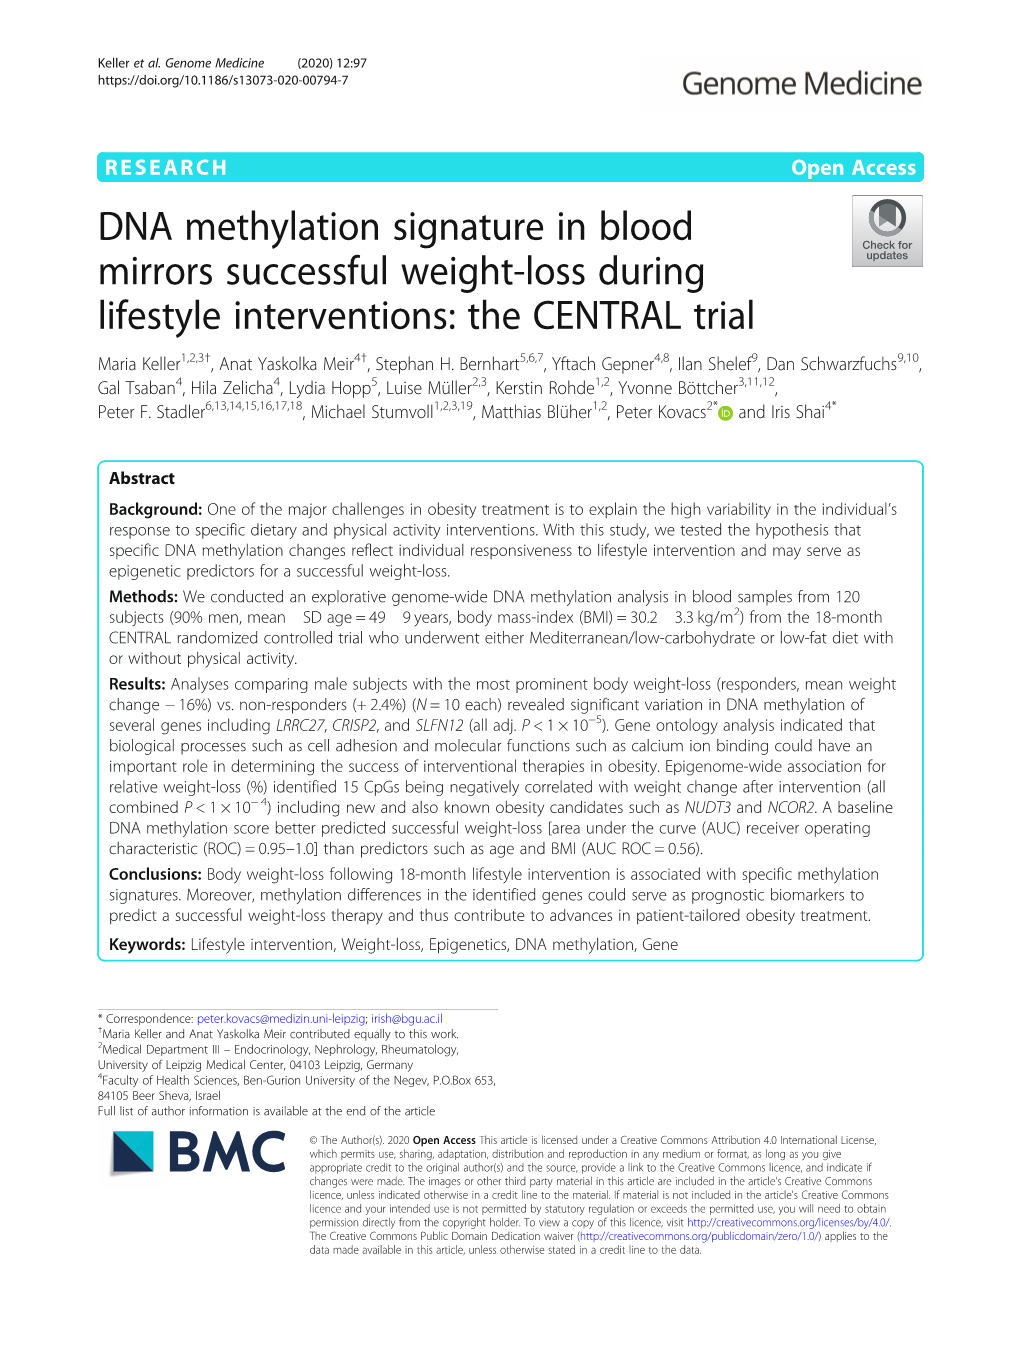 DNA Methylation Signature in Blood Mirrors